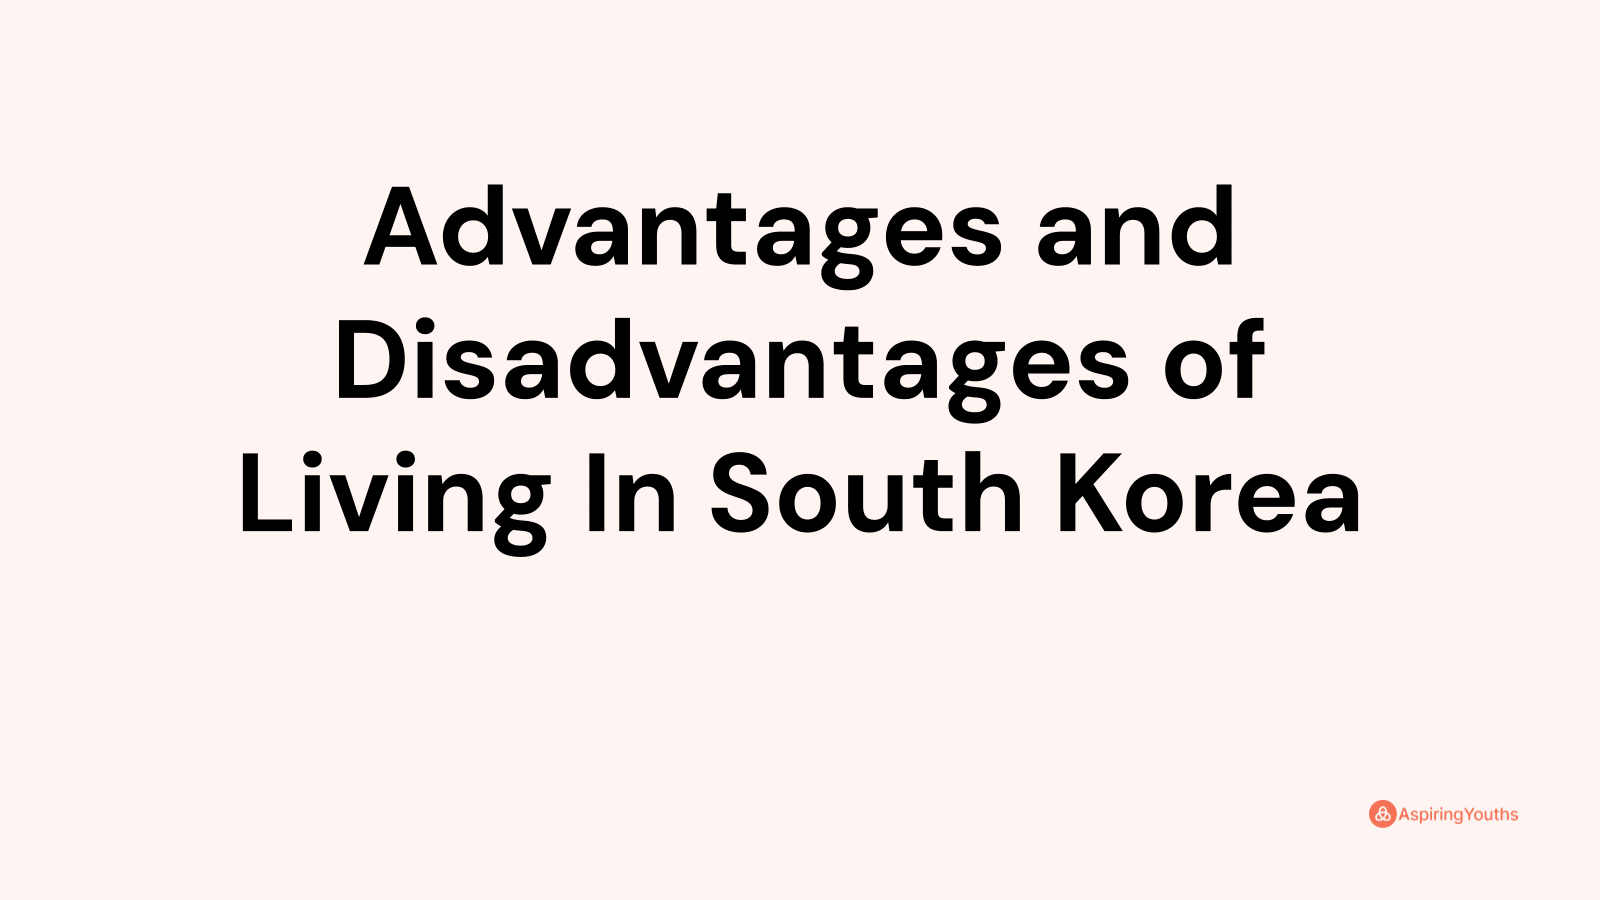 Advantages and disadvantages of Living In South Korea